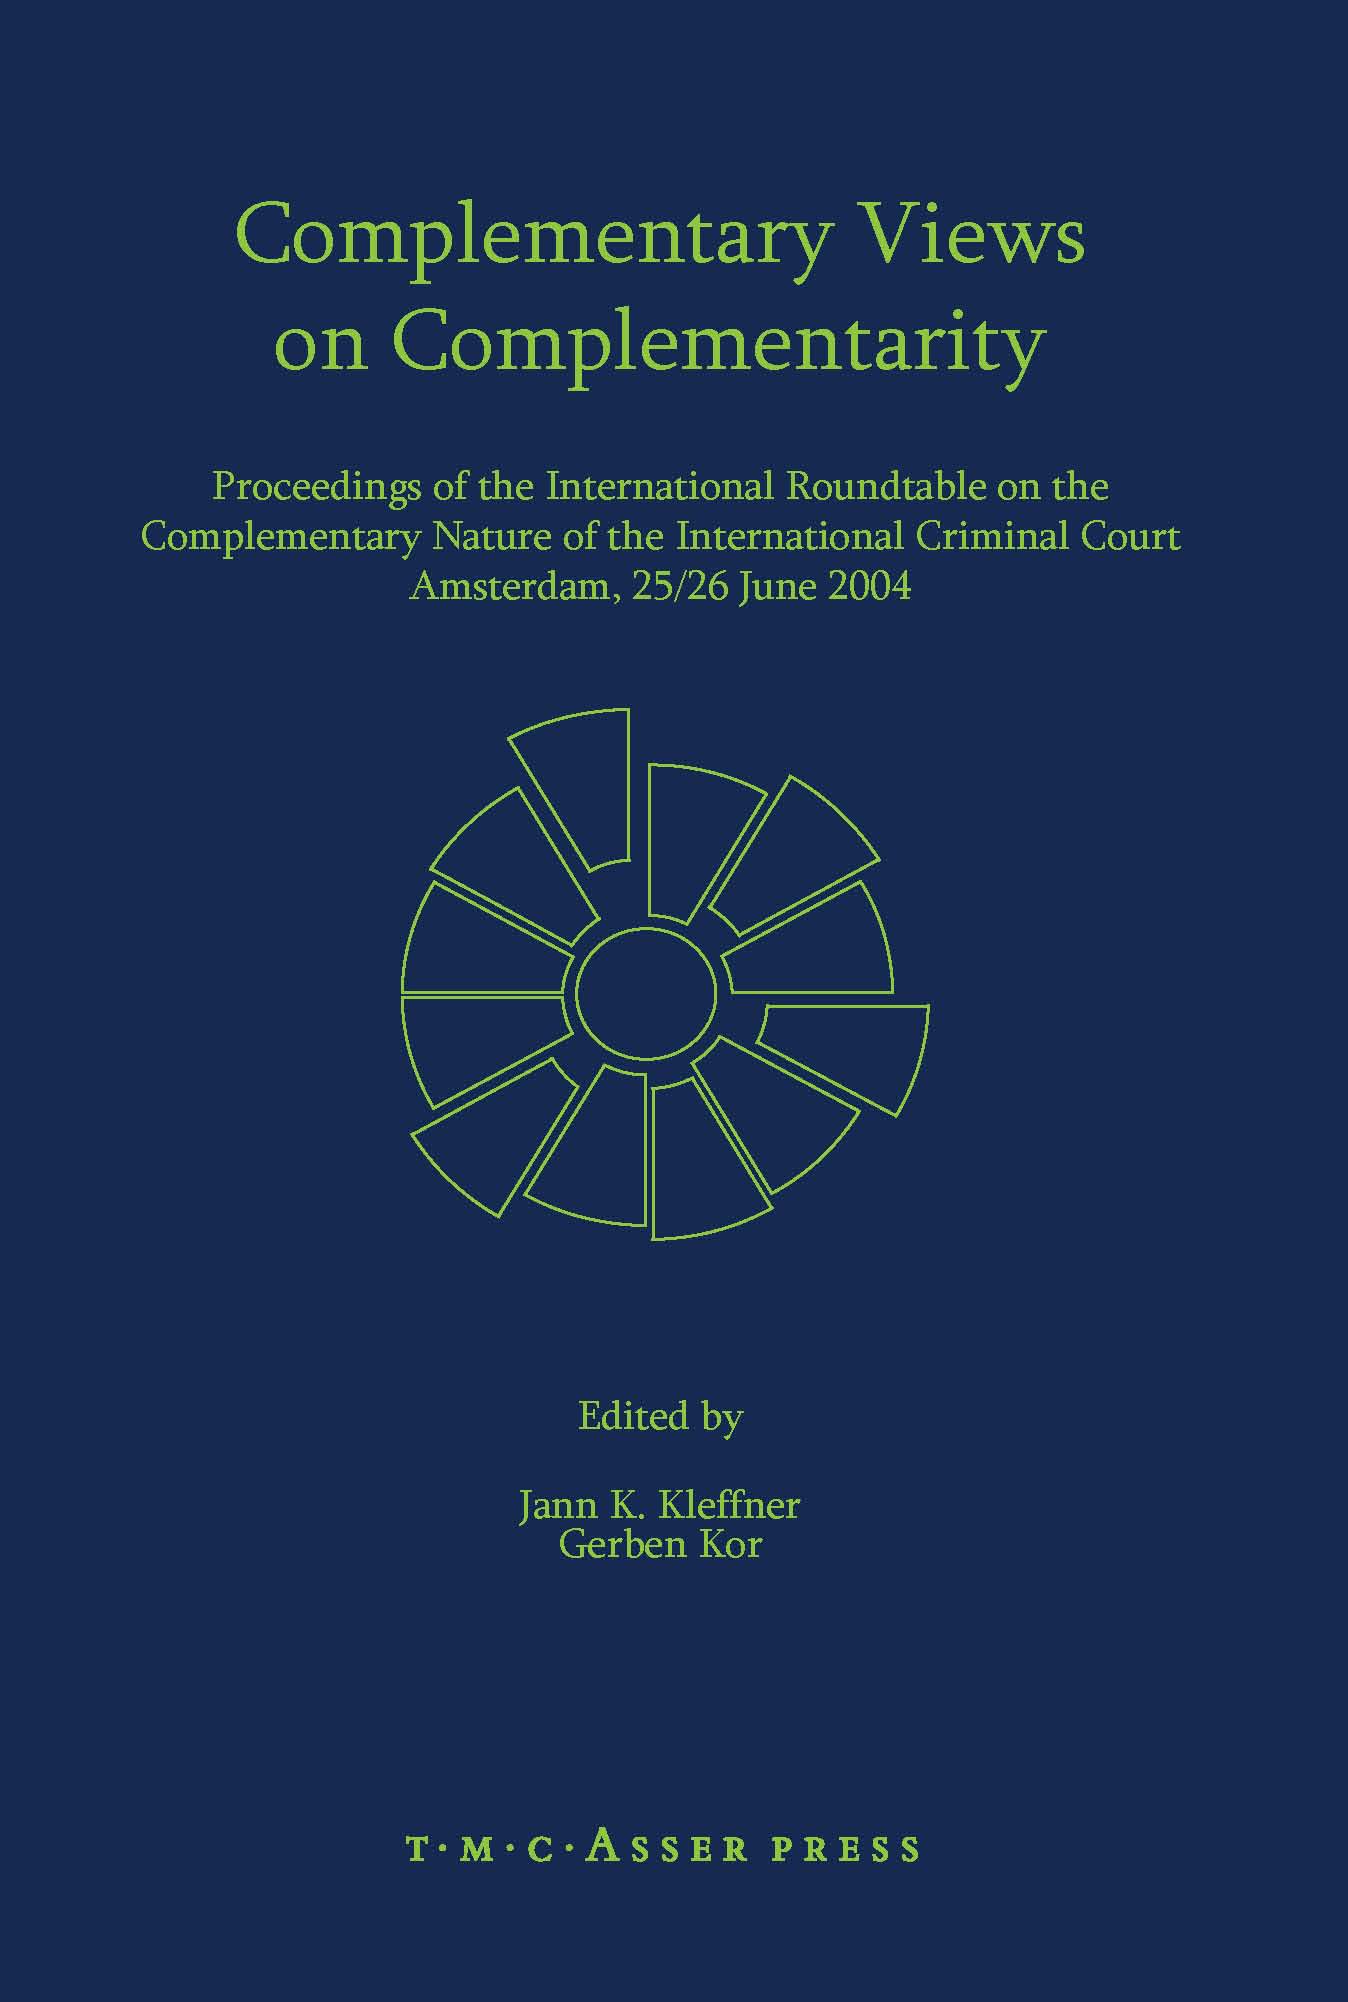 Complementary Views on Complementarity - Proceedings of the International Roundtable on the Complementary Nature of the International Criminal Court, Amsterdam 25/26 June 2004